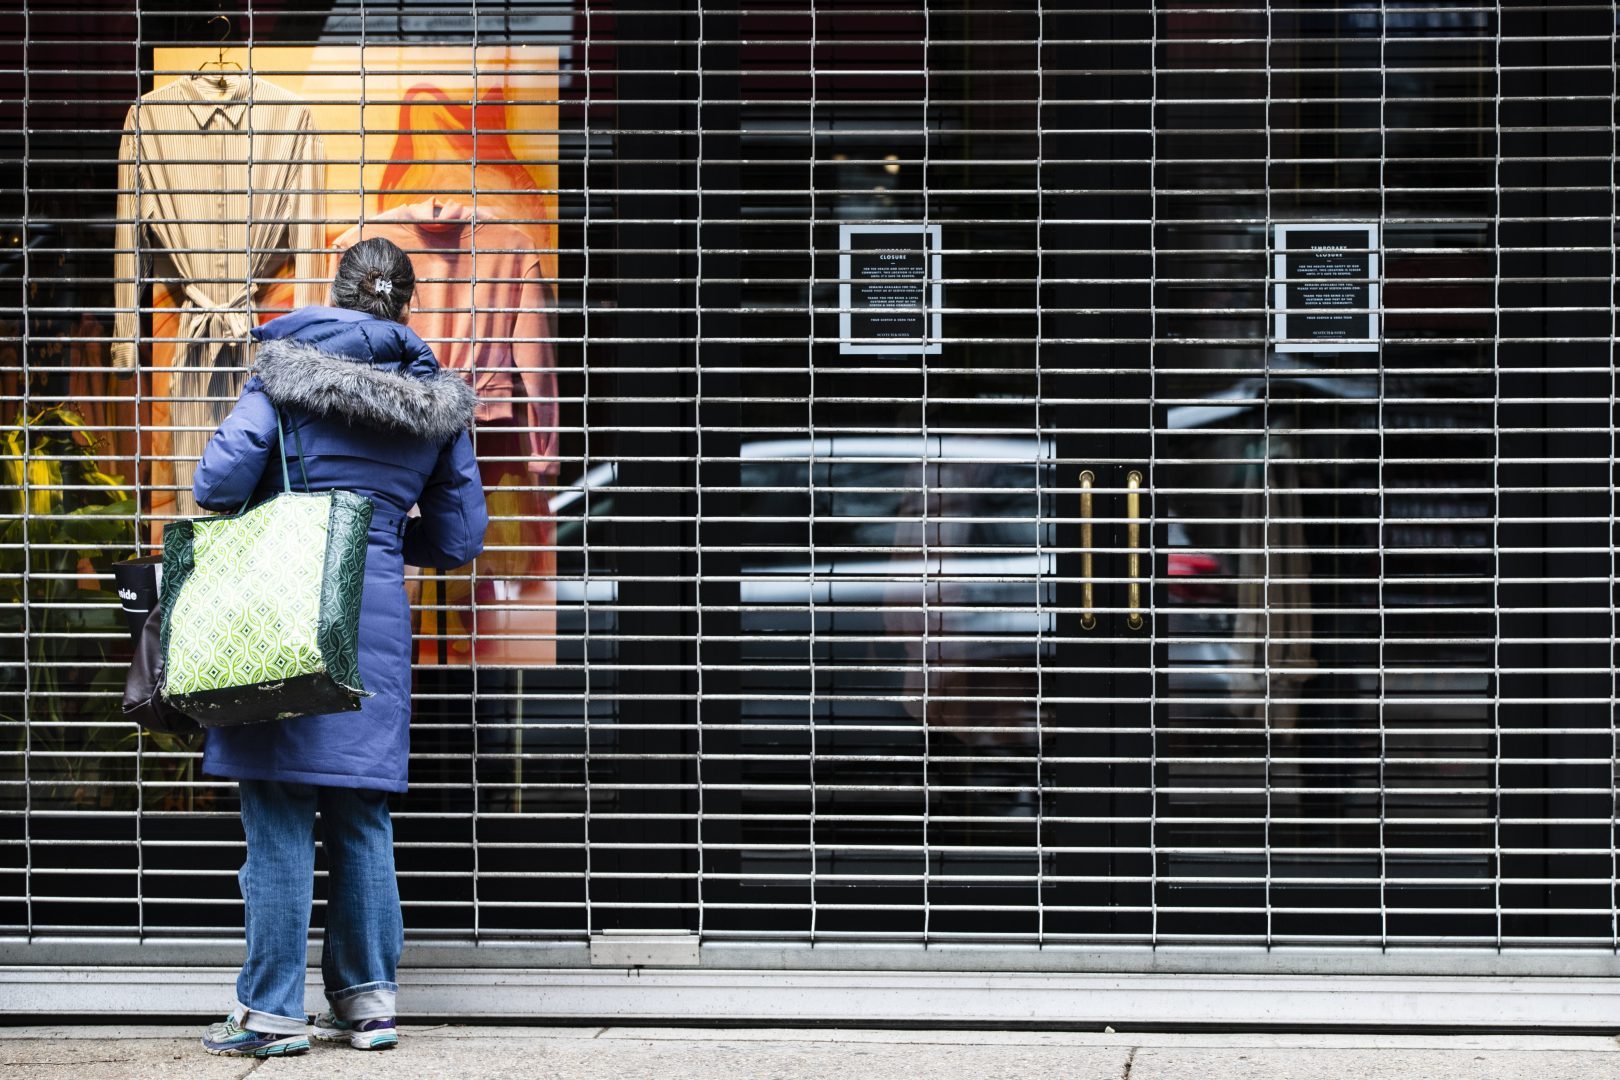 A person window shops at an temporary closed business in Philadelphia, Thursday, March 19, 2020. (AP Photo/Matt Rourke)